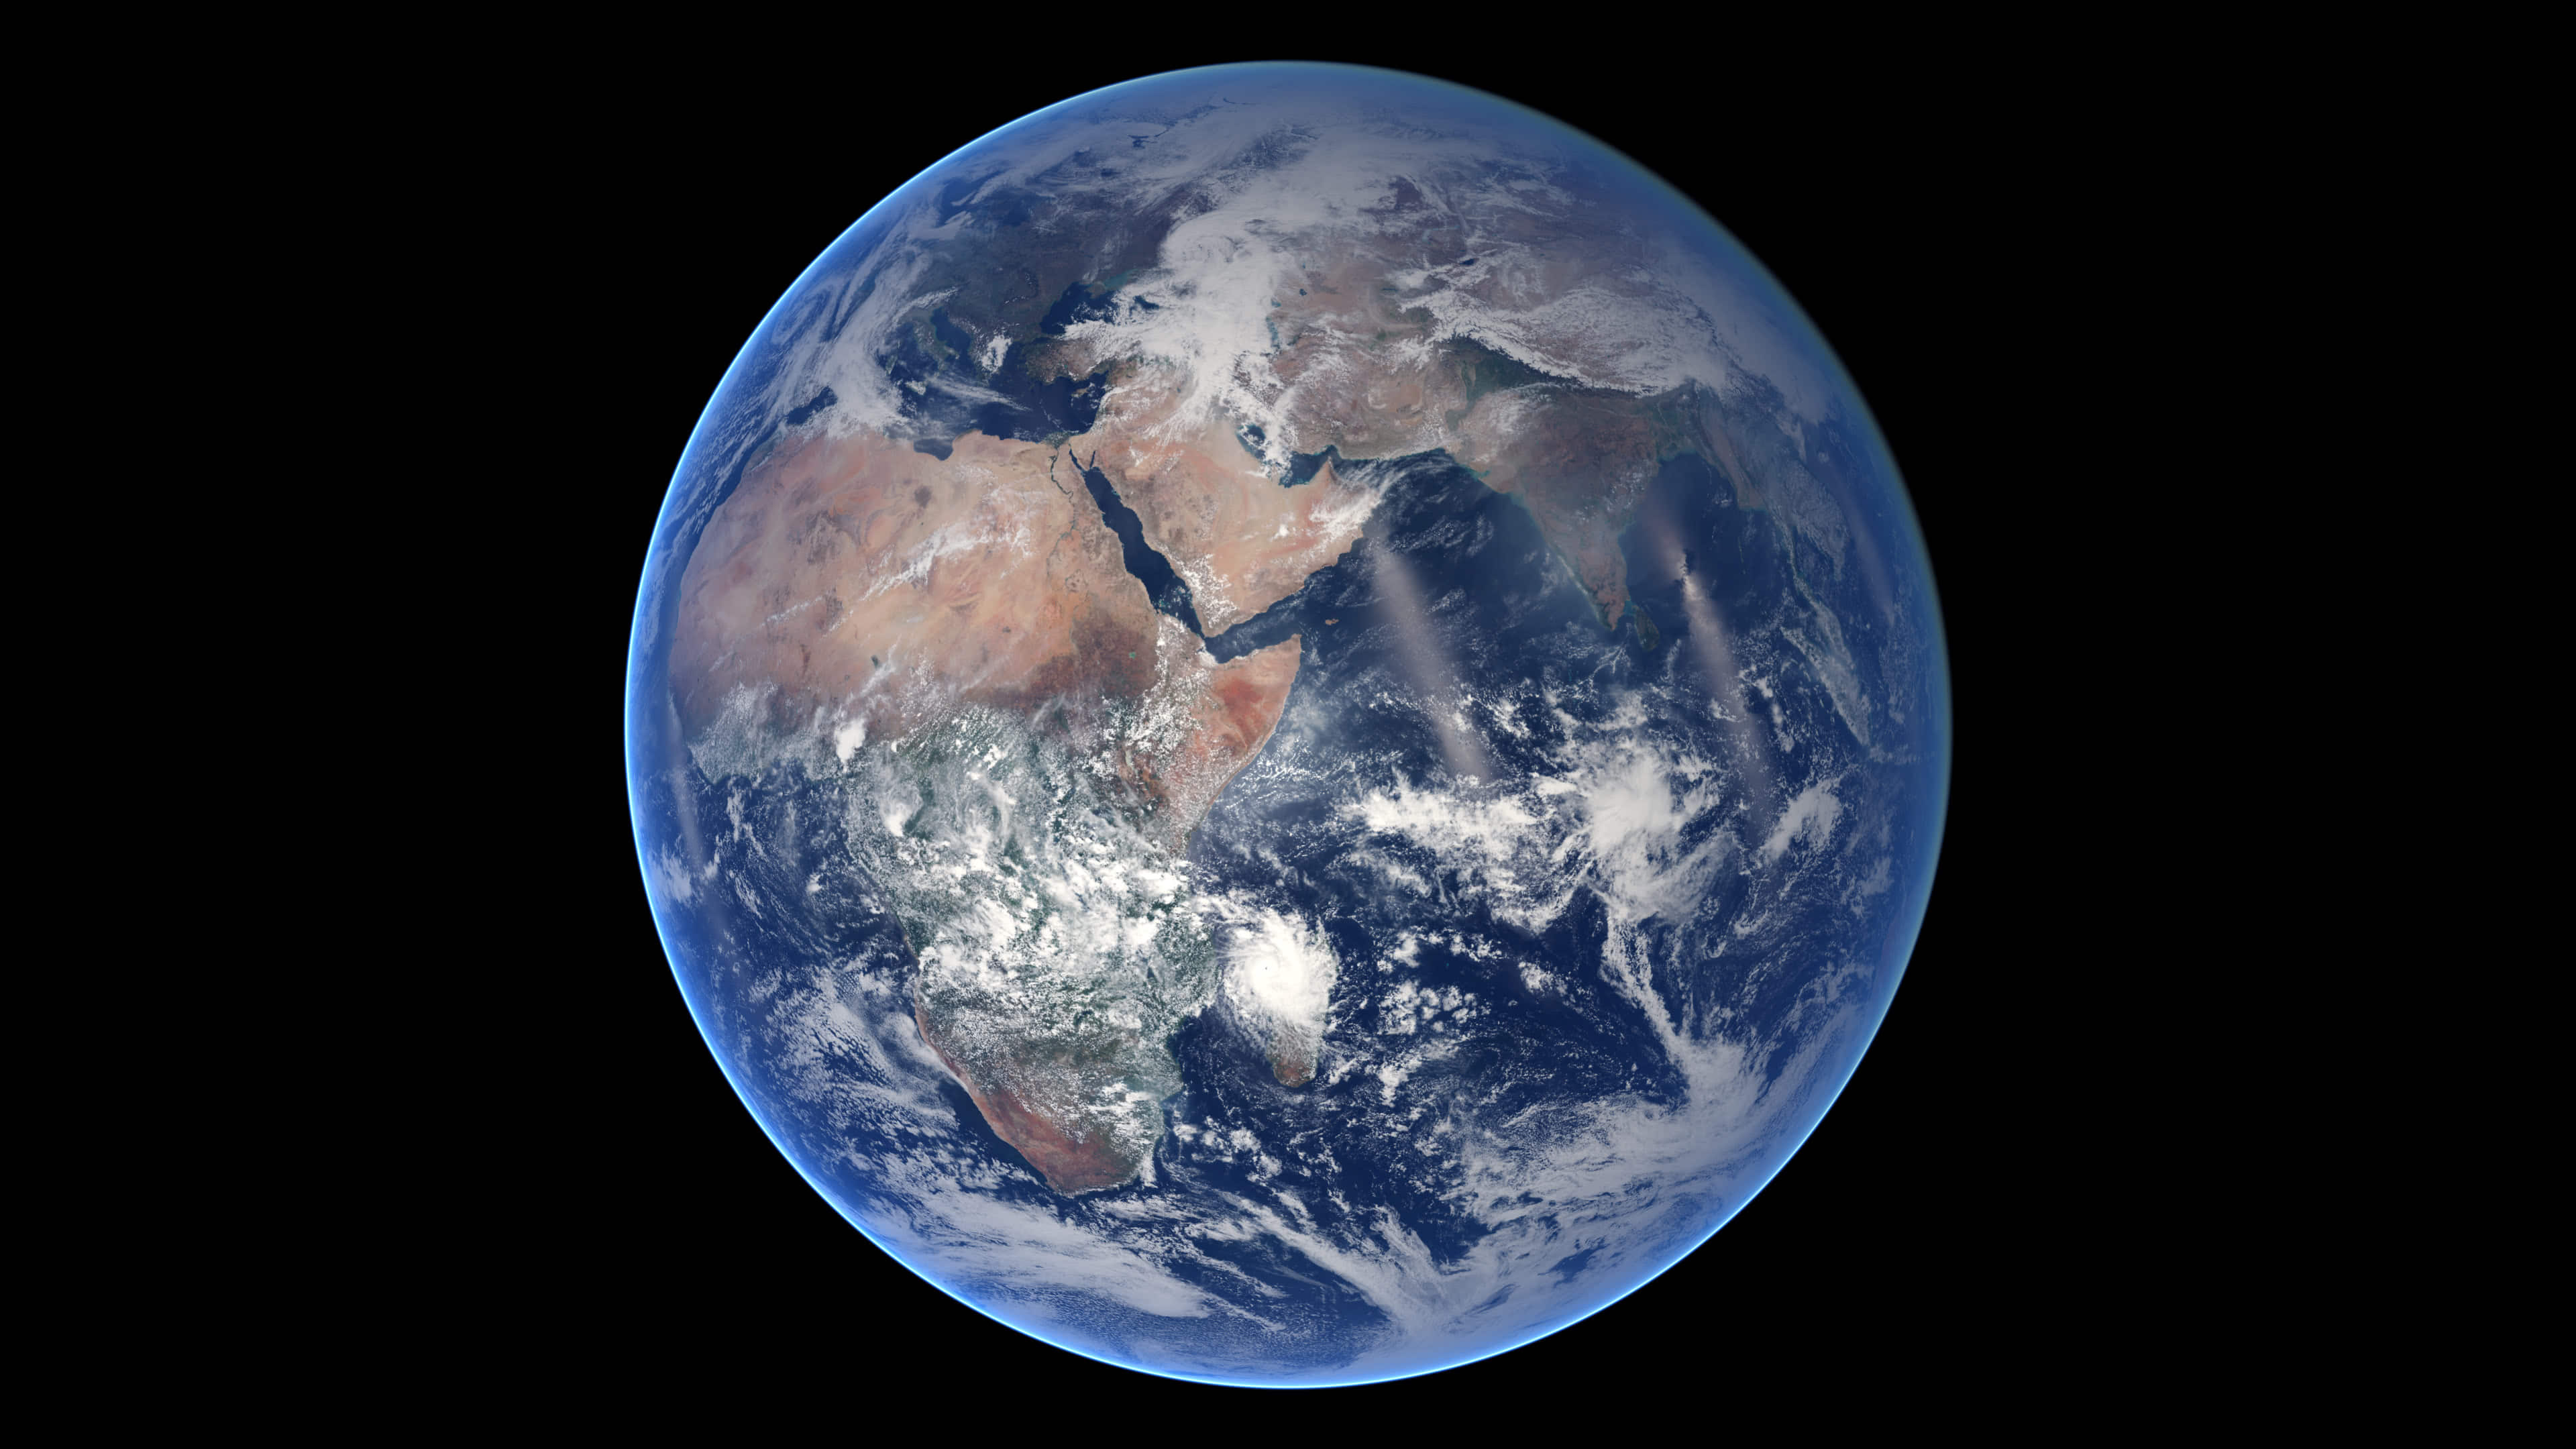 The Blue Marble Spins, NASA Portrait Of Earth UHD 4K Wallpaper | Pixelz